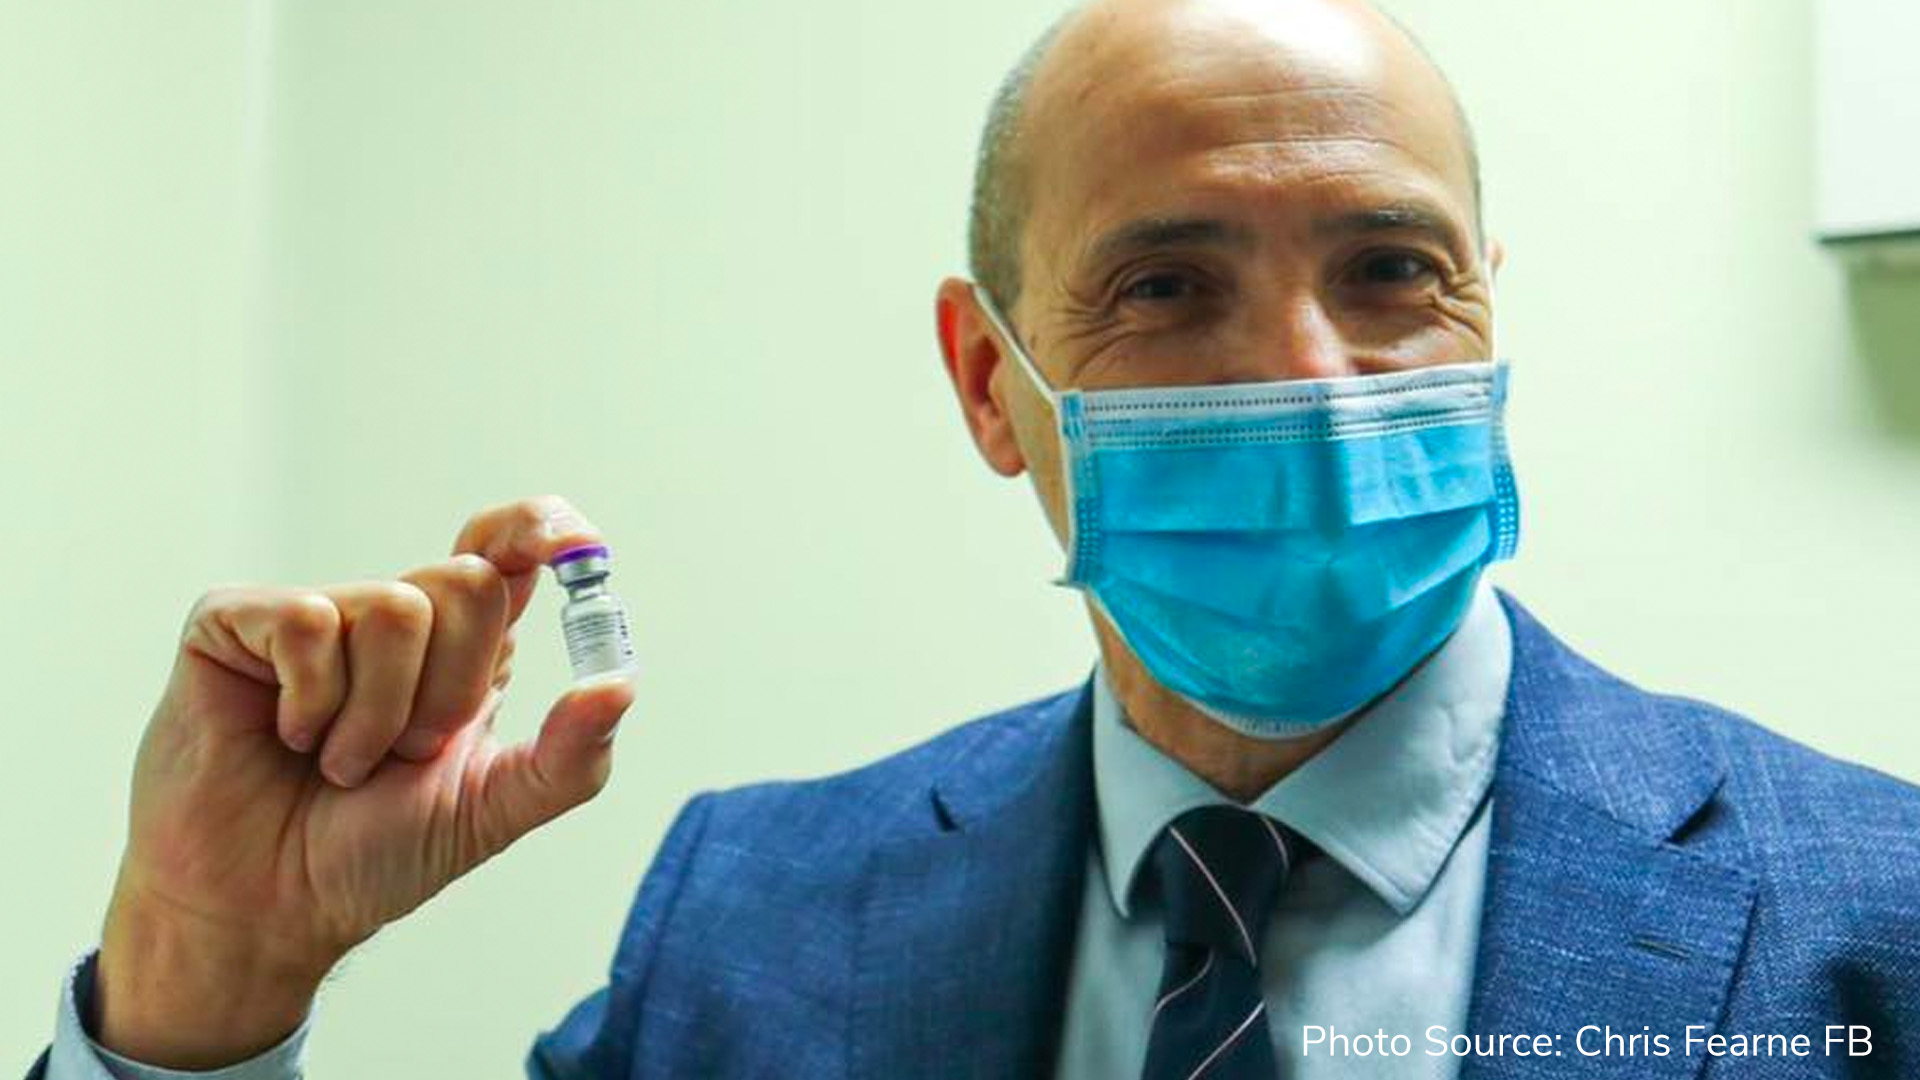 Chris Fearne predicts Herd Immunity by end of June for Malta